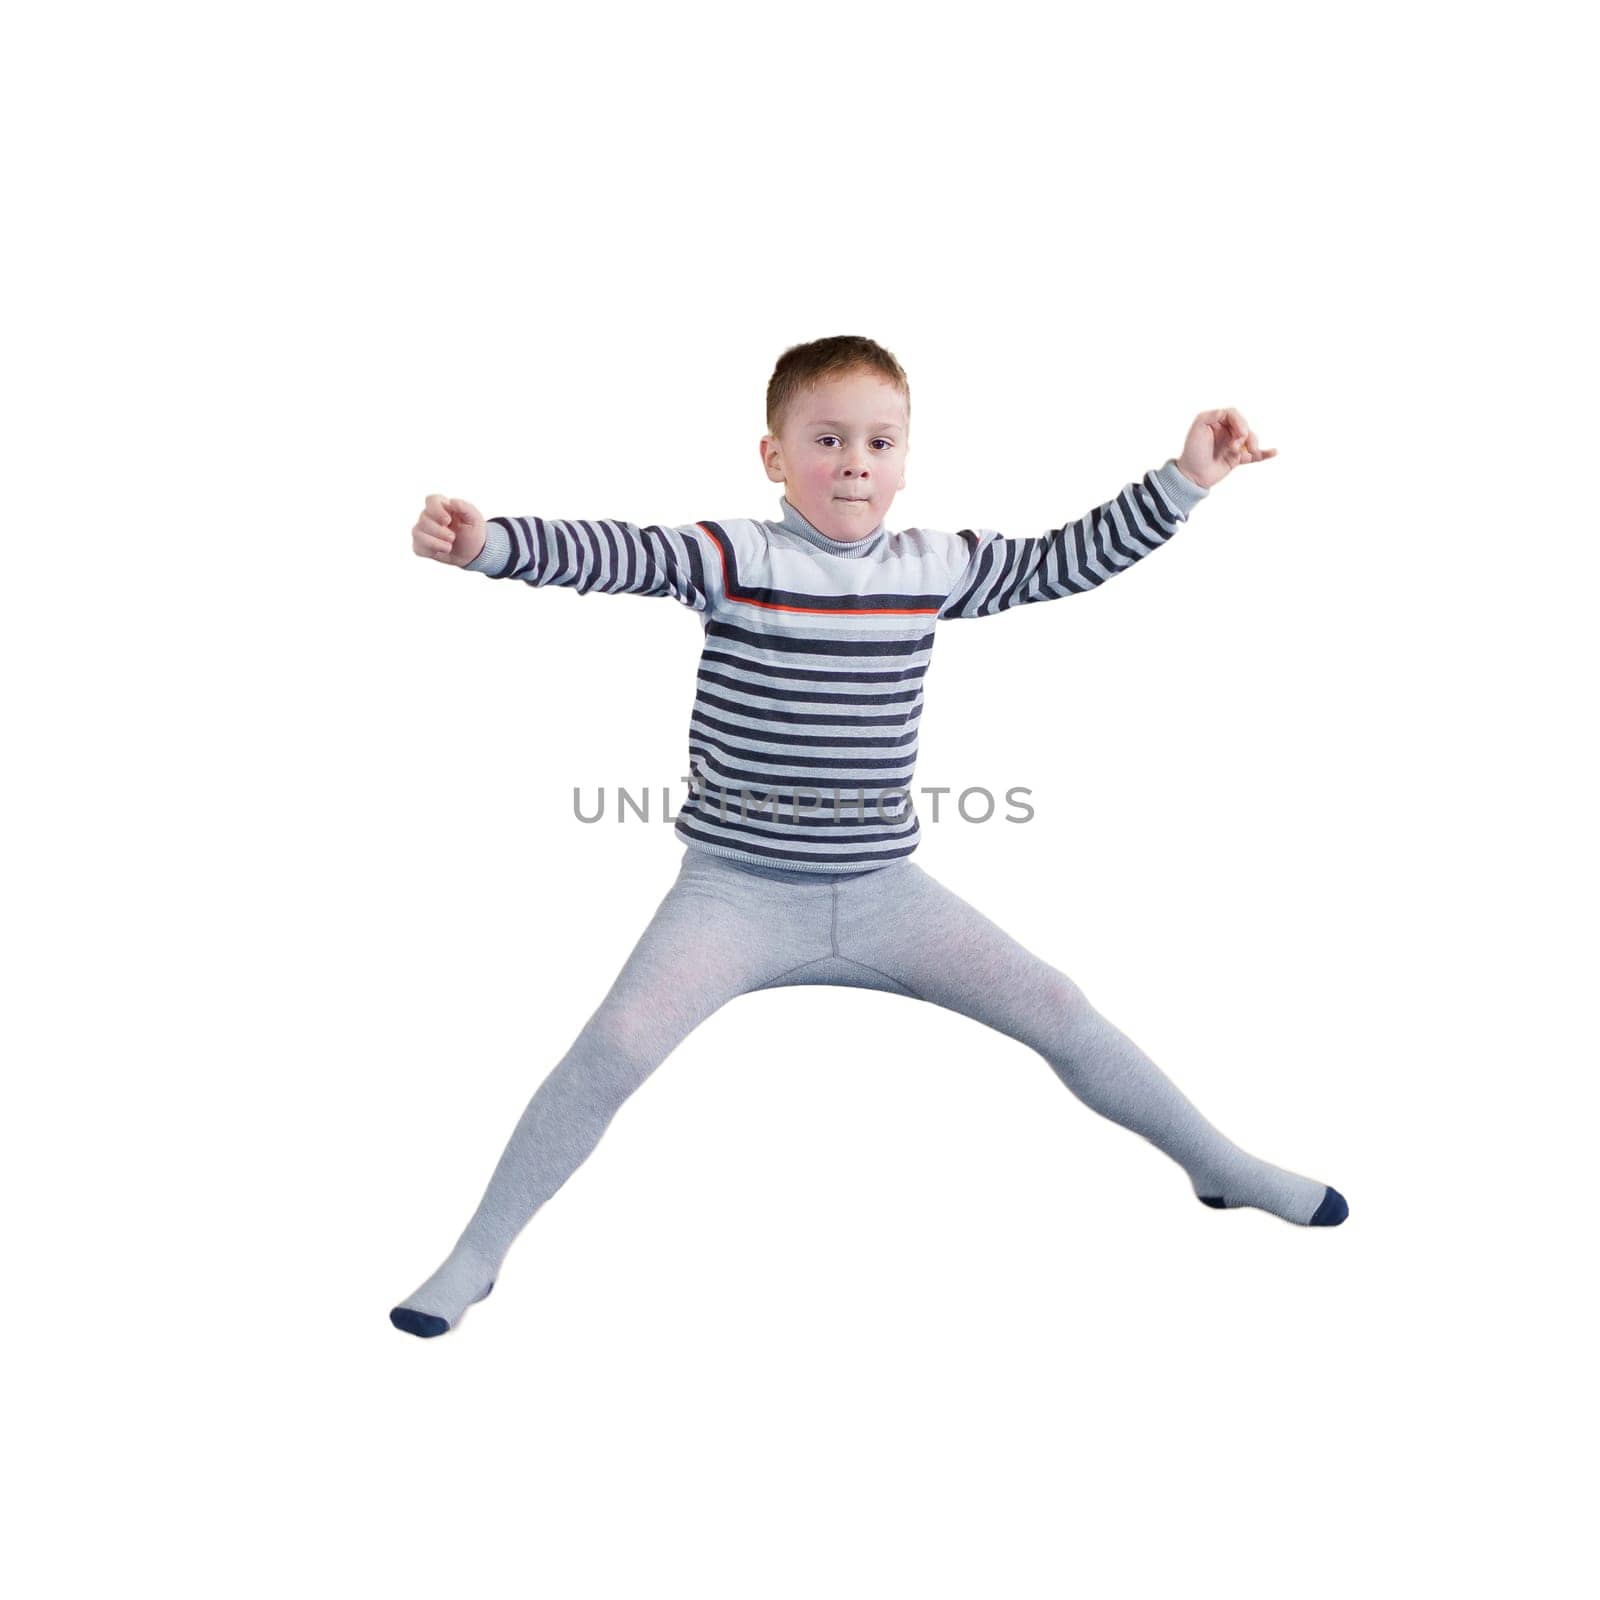 Happy smiling small kids jumping high isolated on white background